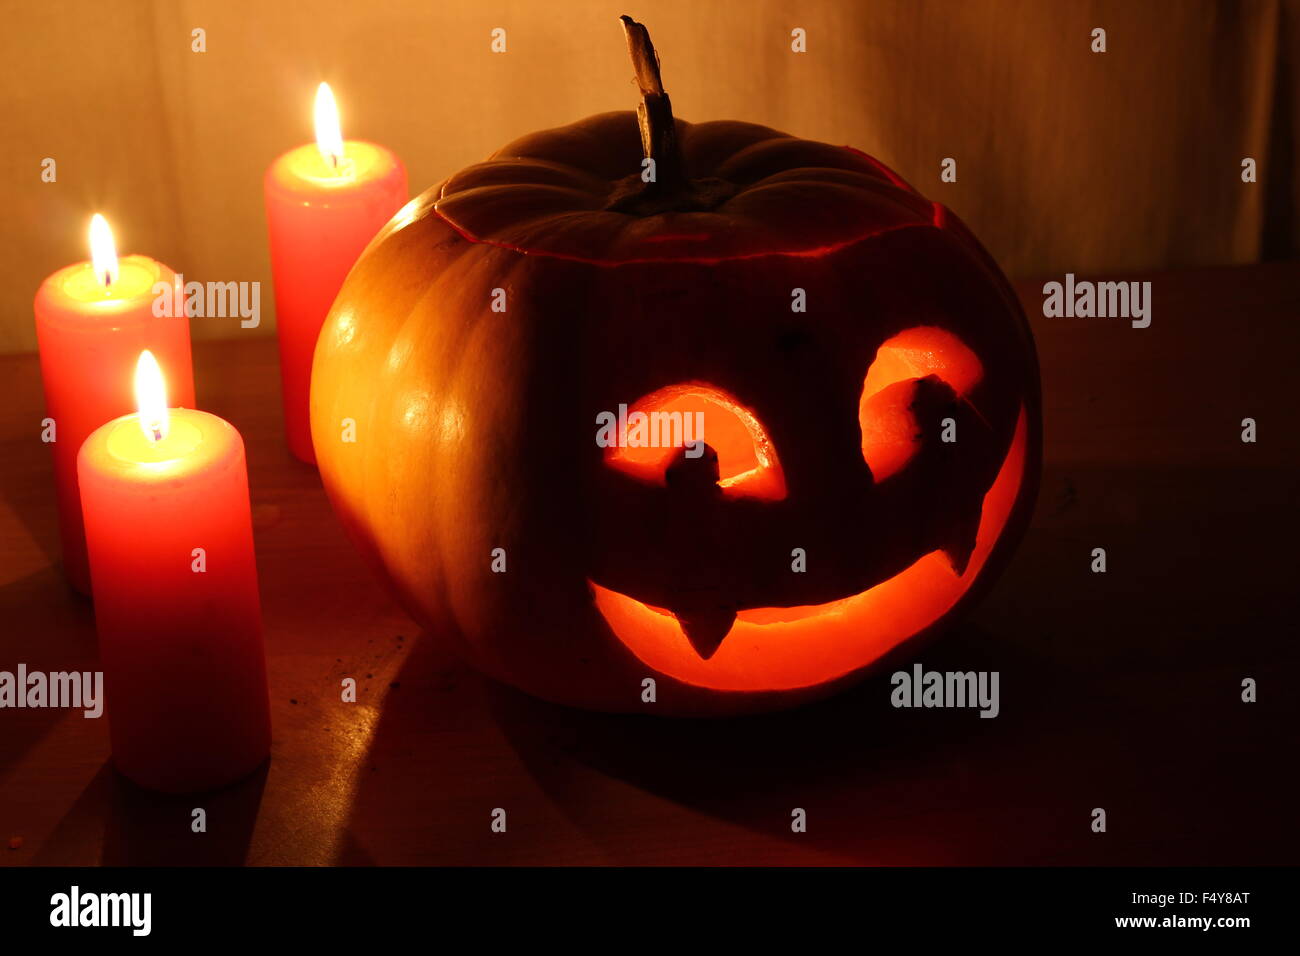 Scary Halloween pumpkin with candles on a dark background Stock Photo